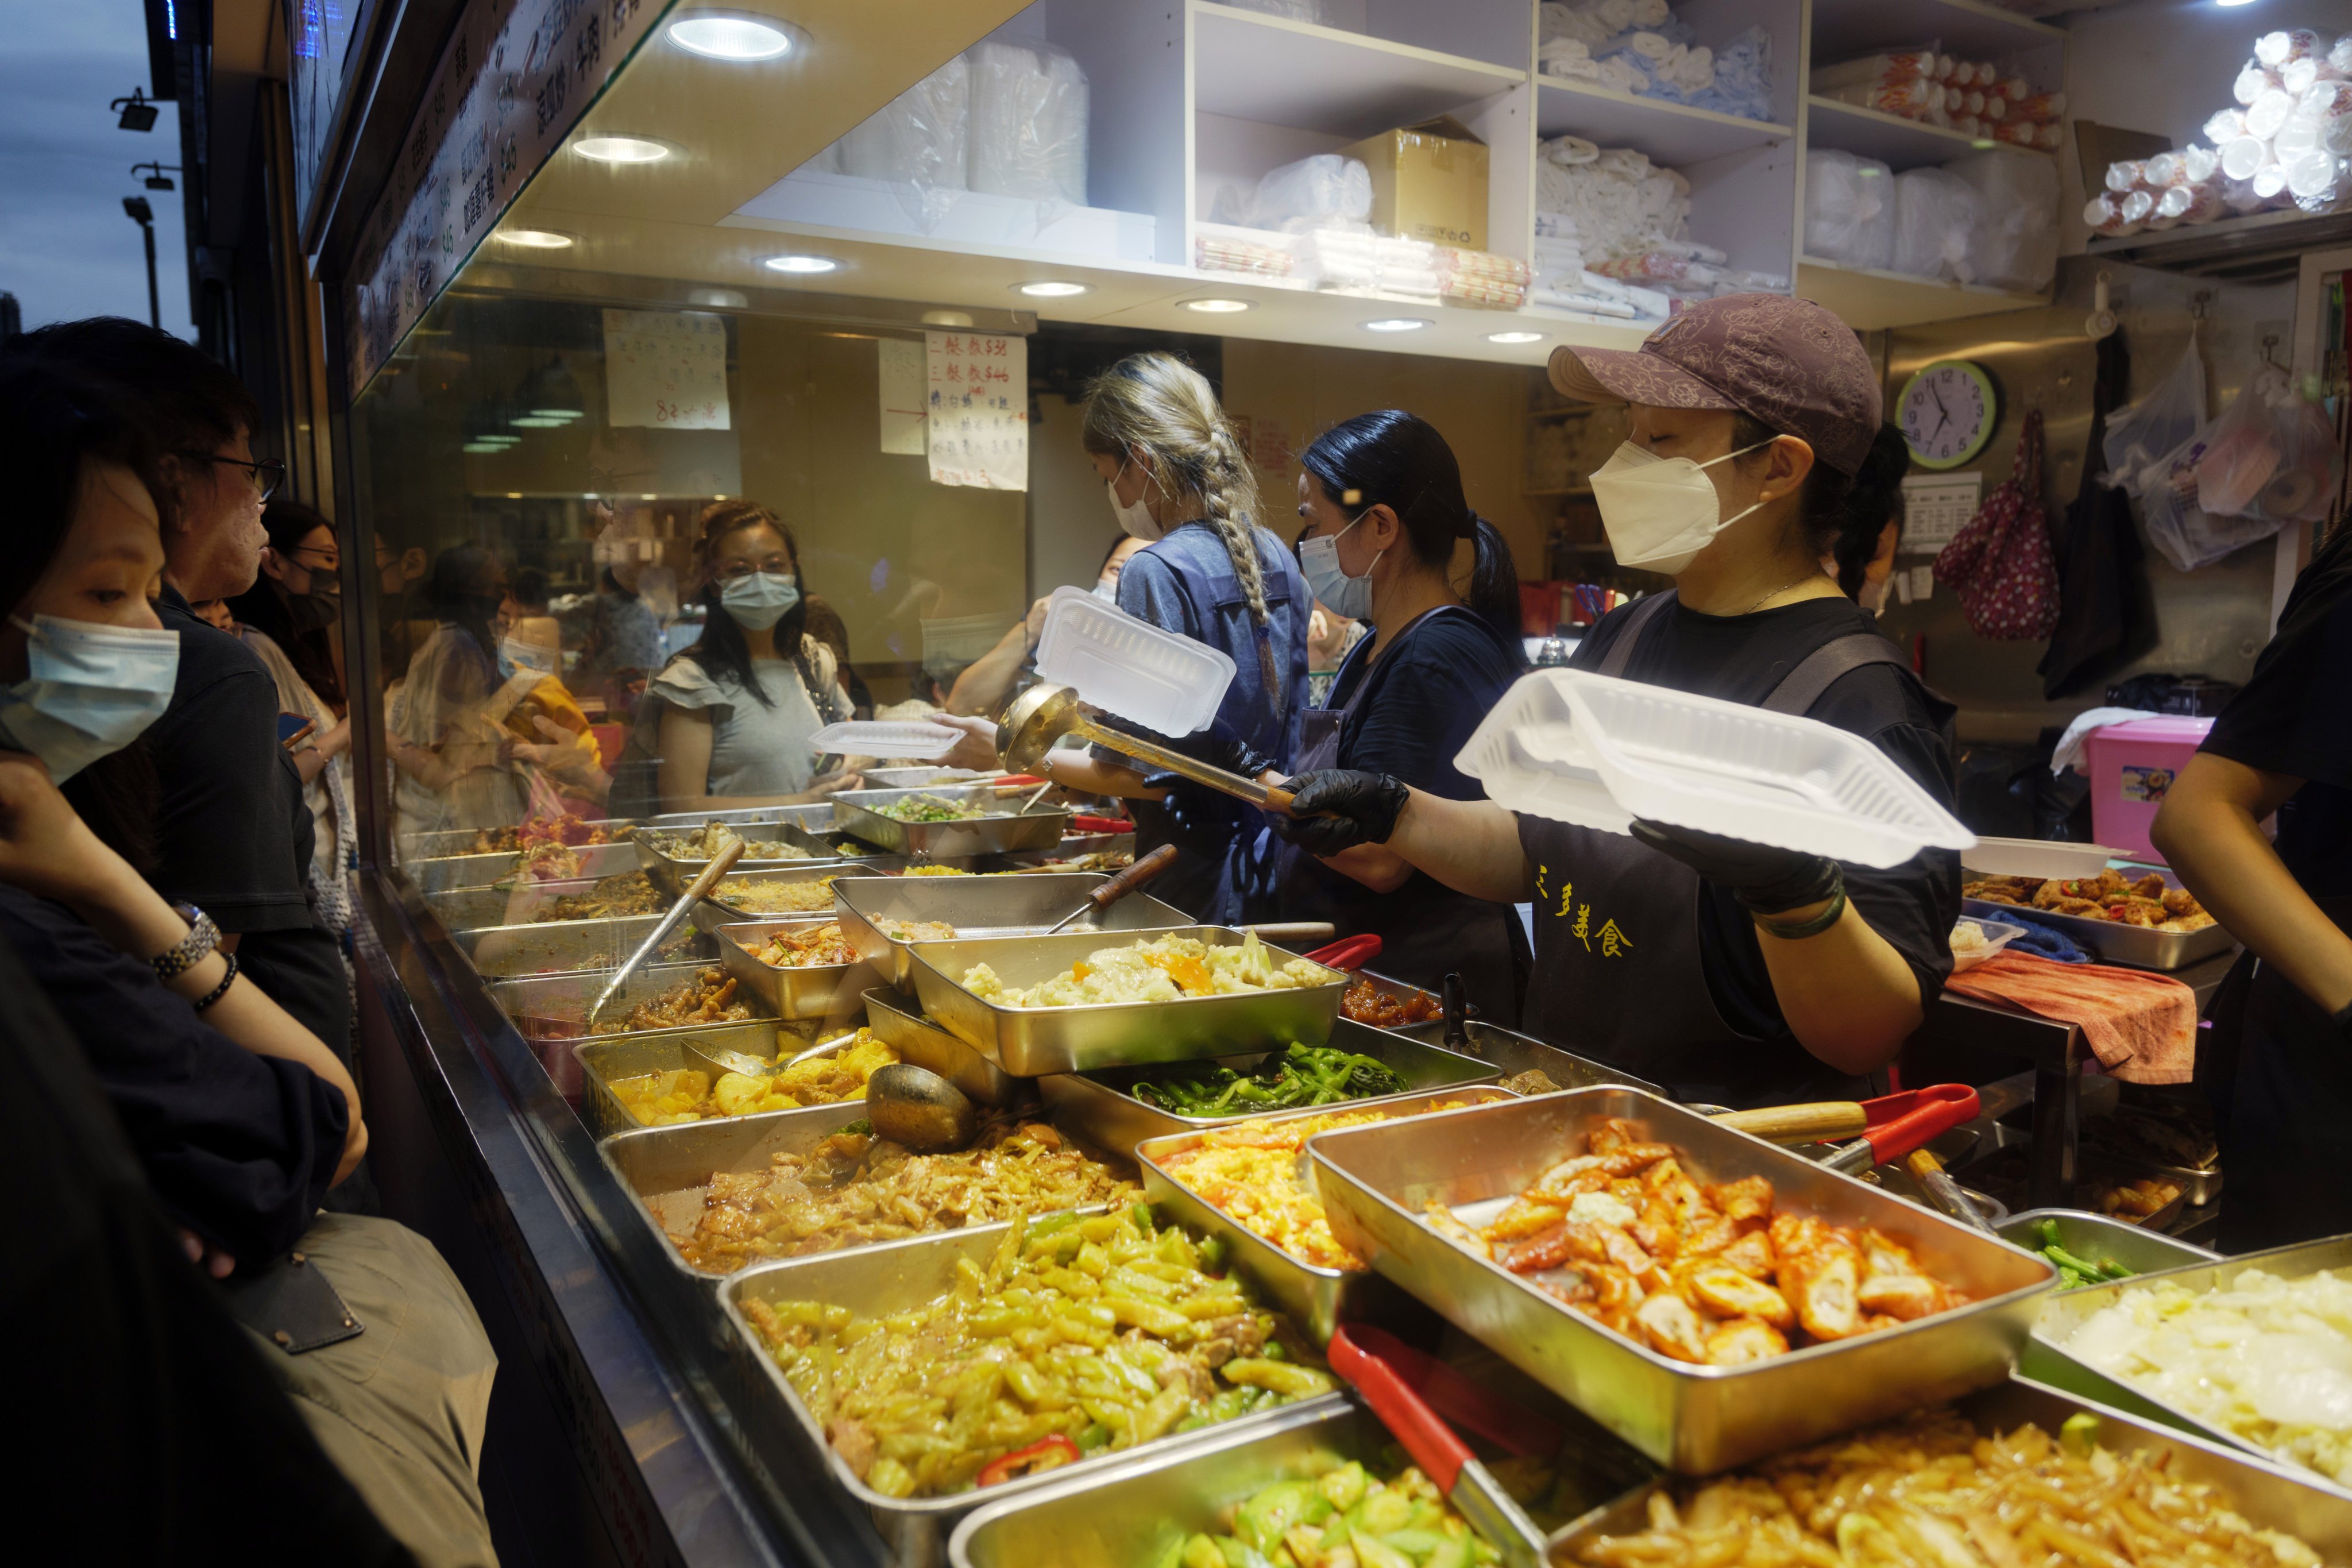 The “two-dish-rice” stores typically operated in lower-income neighbourhoods before the pandemic. Photo: Daniel Suen